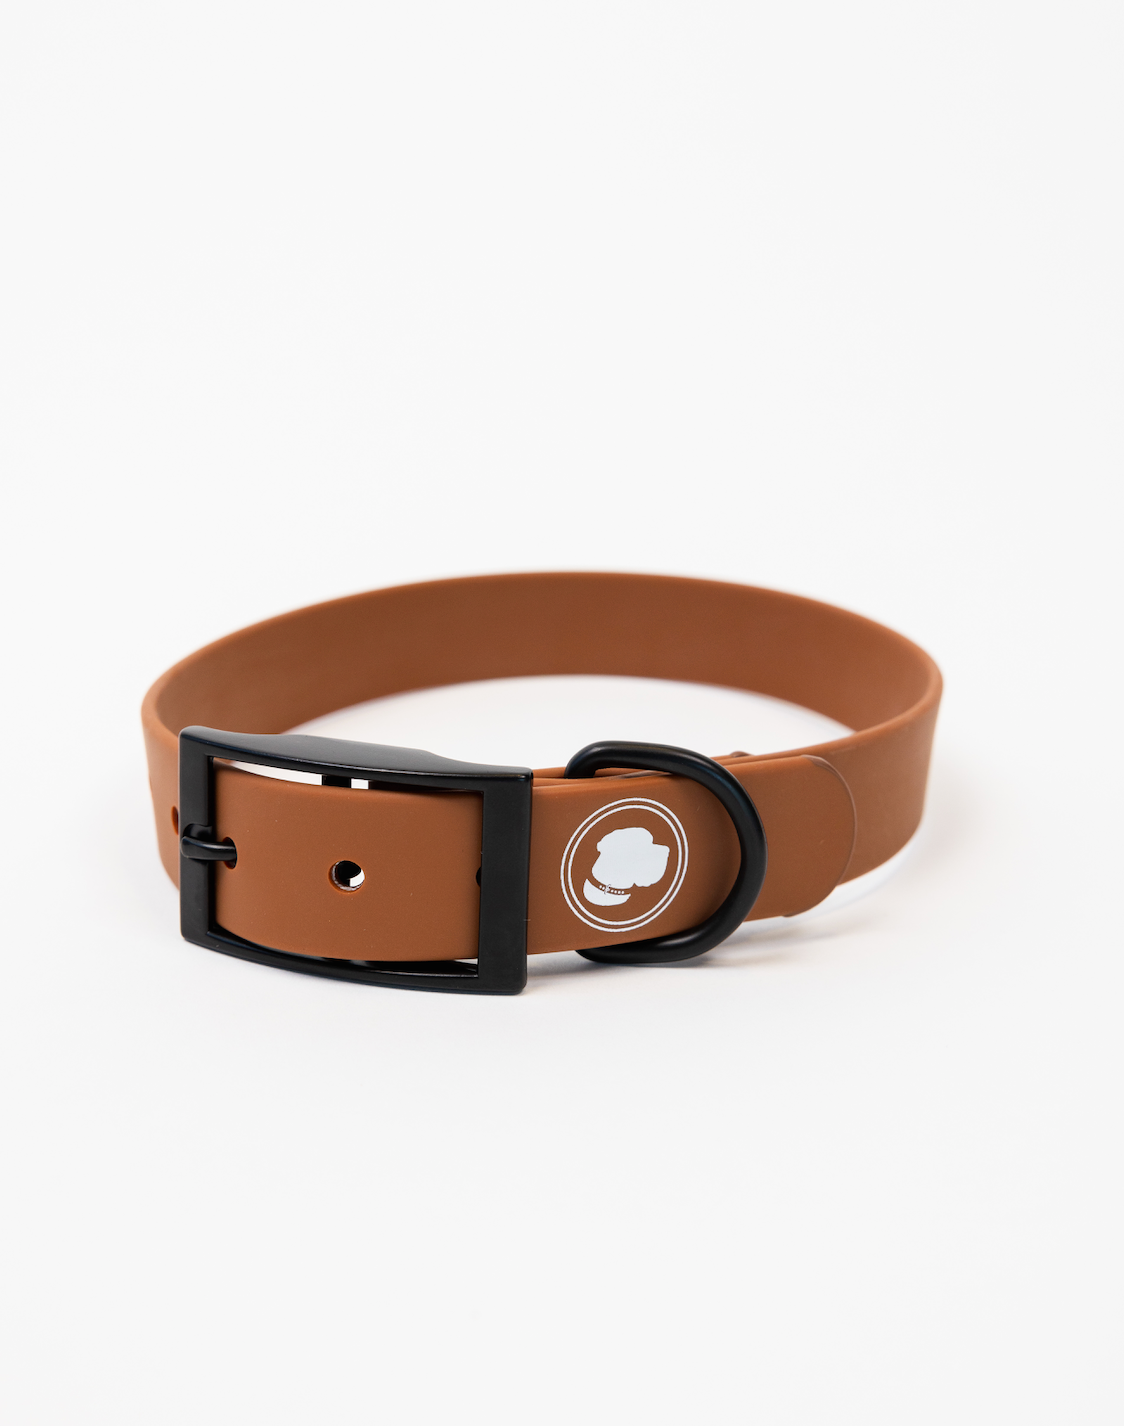 The Modern Dog Company - Coco Brown Collar (Weather + Odor Resistant)